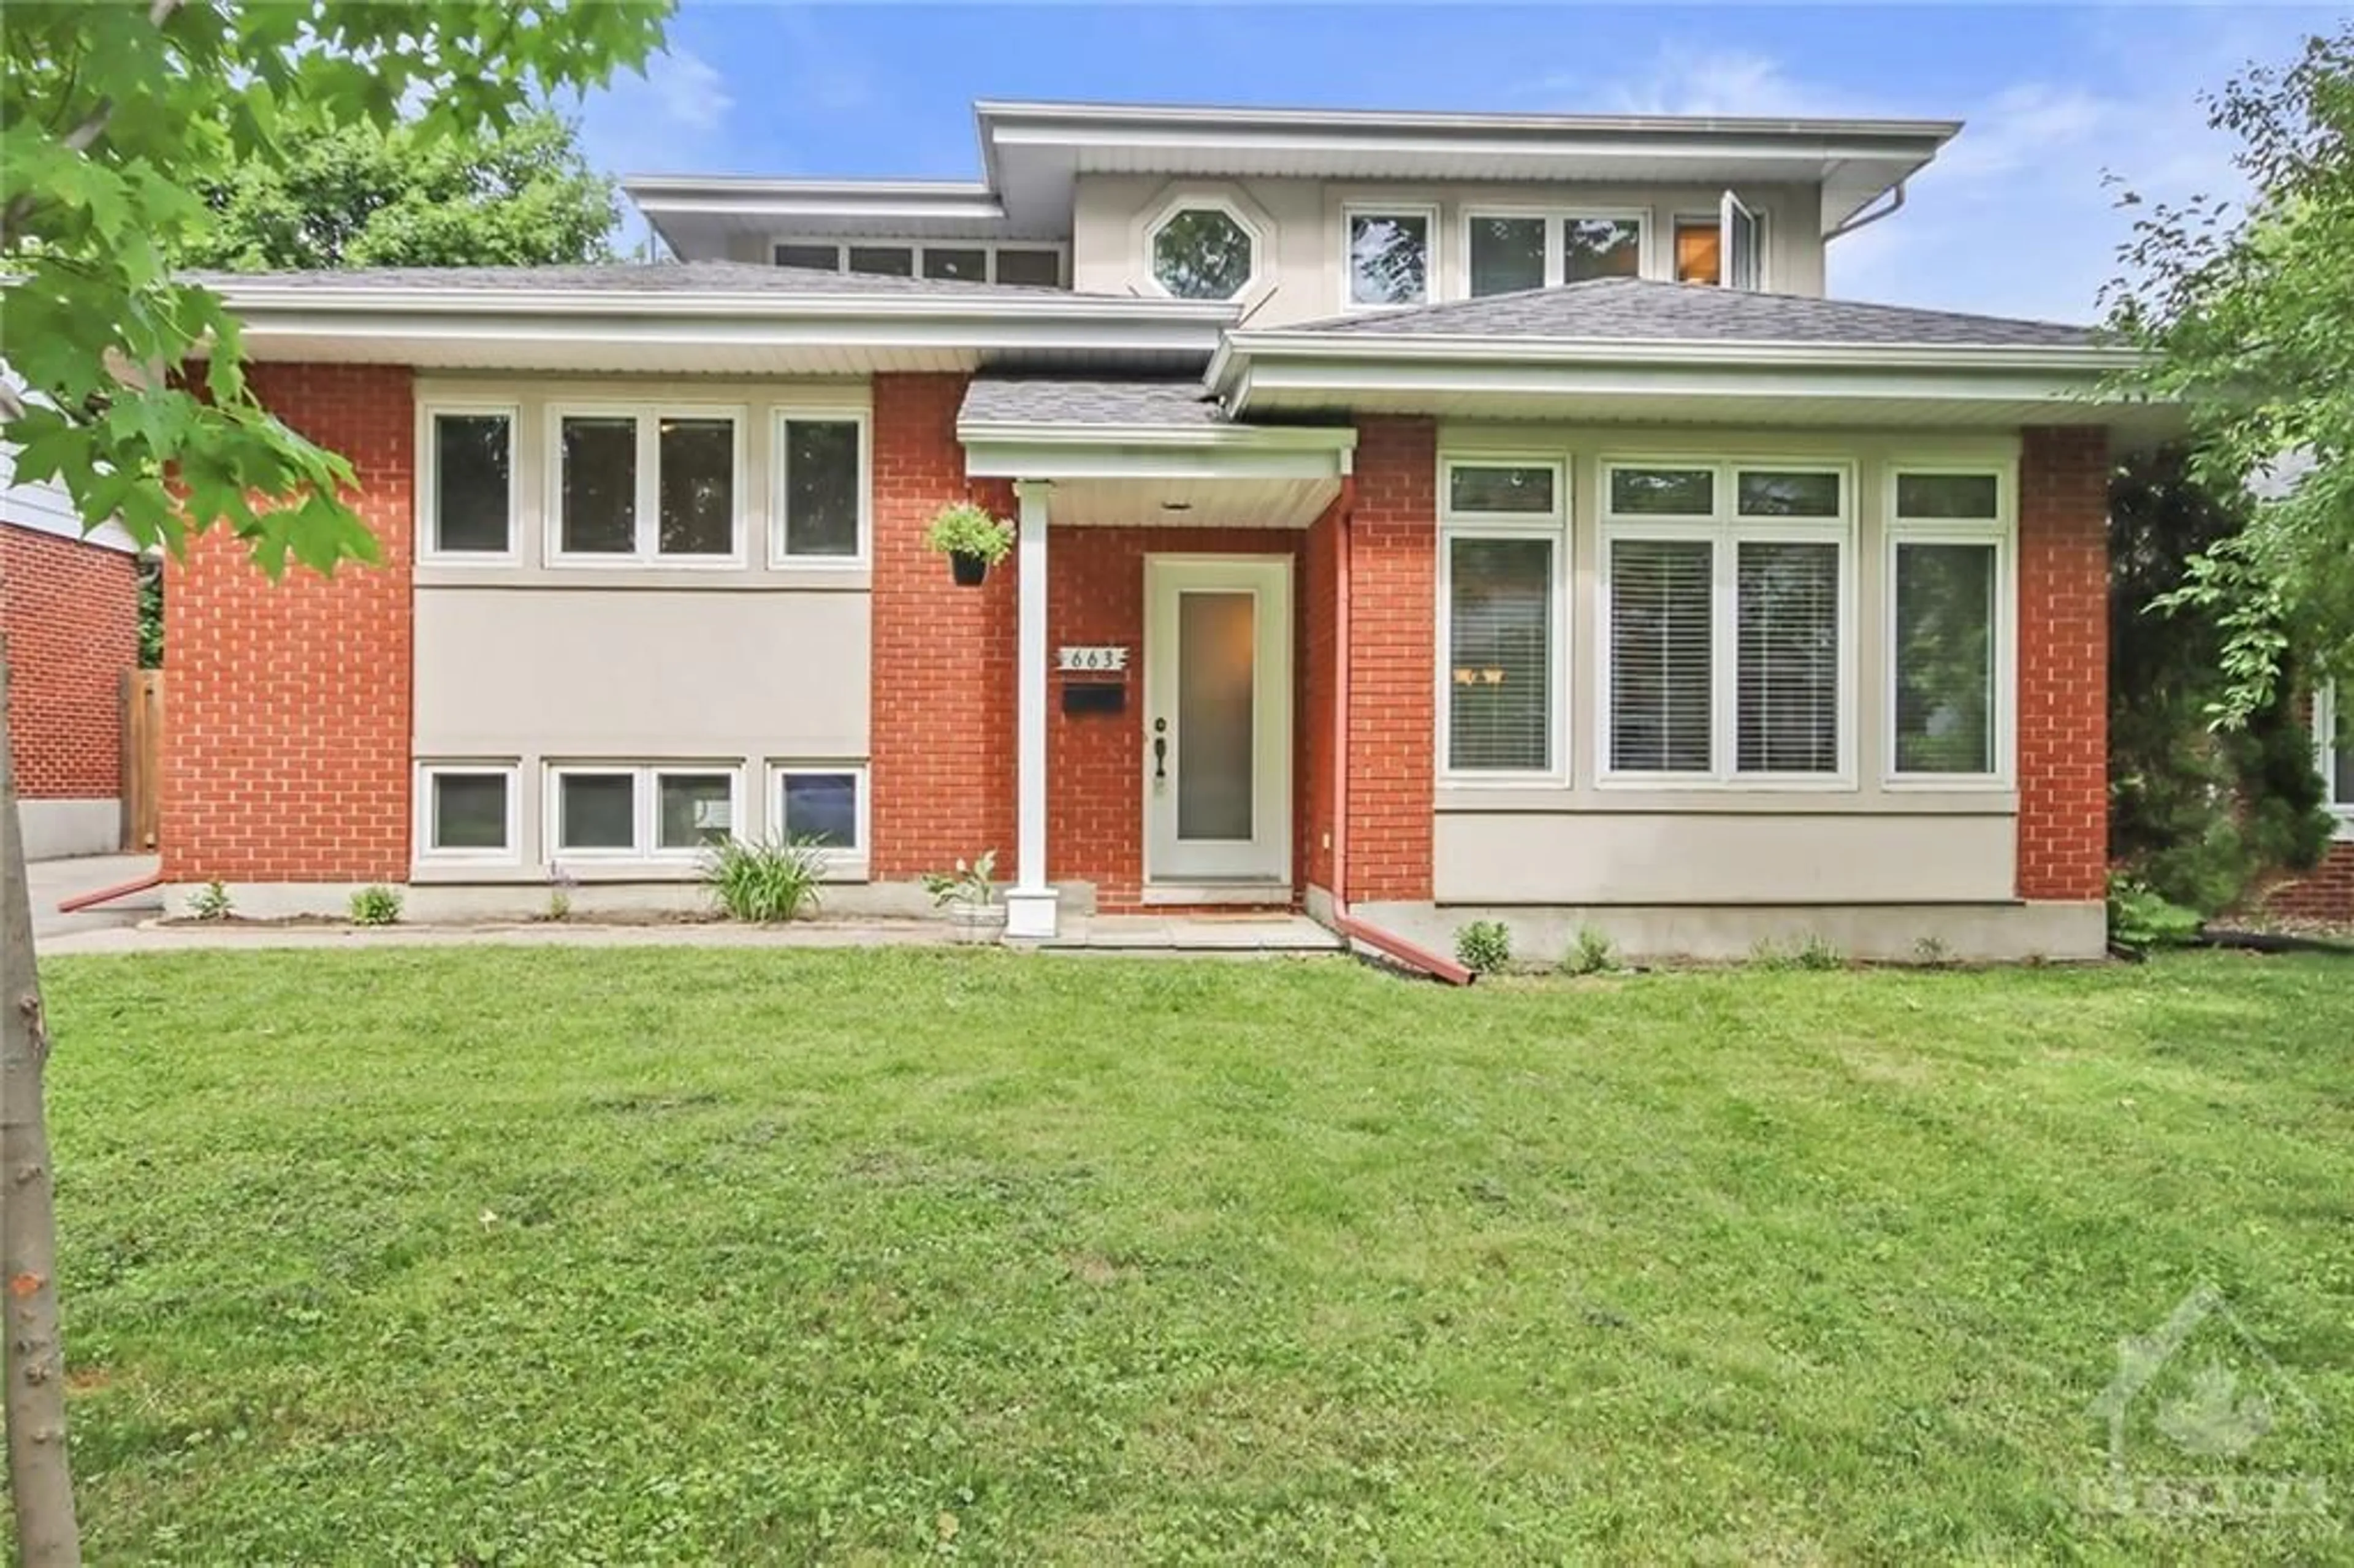 Home with brick exterior material for 663 WESTMINSTER Ave, Ottawa Ontario K2A 2V7